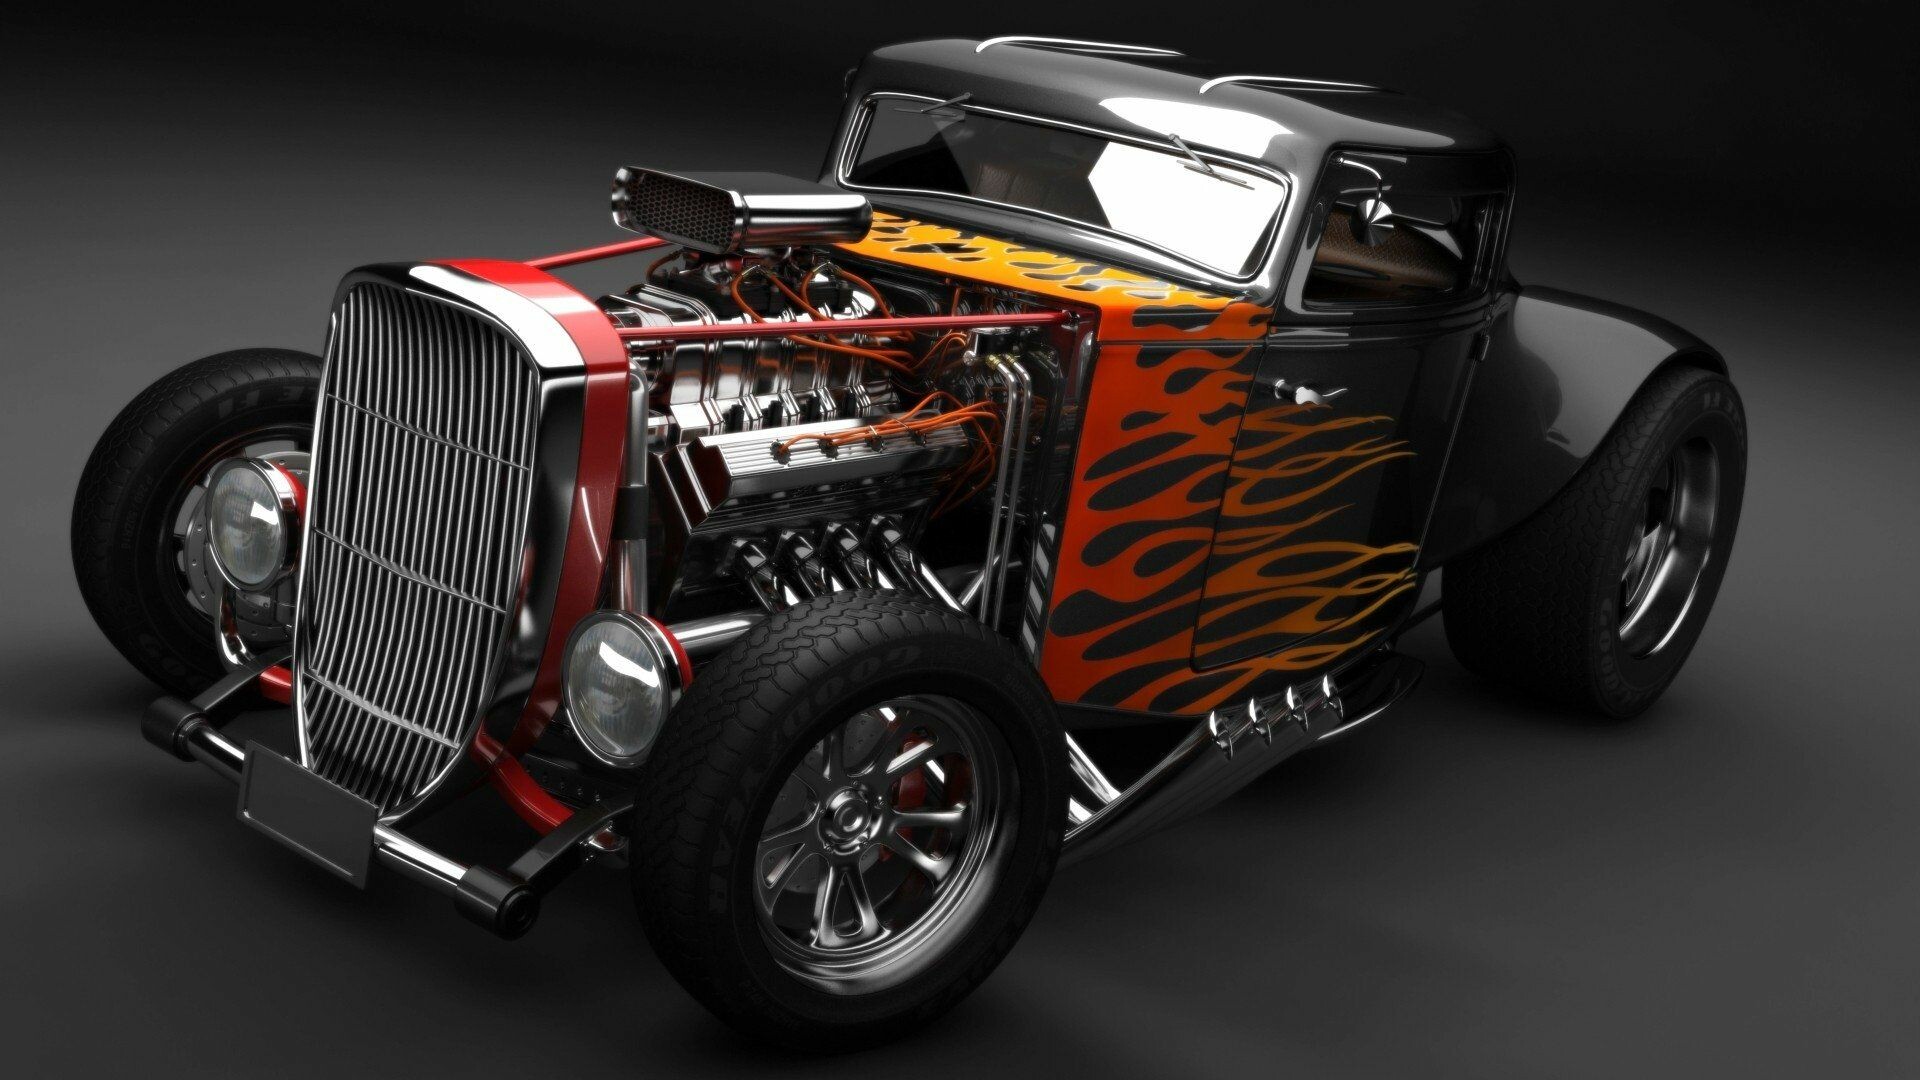 Hot Rod: A passenger car or truck manufactured before 1949 that has been modified for style, safety, and reliability. 1920x1080 Full HD Background.